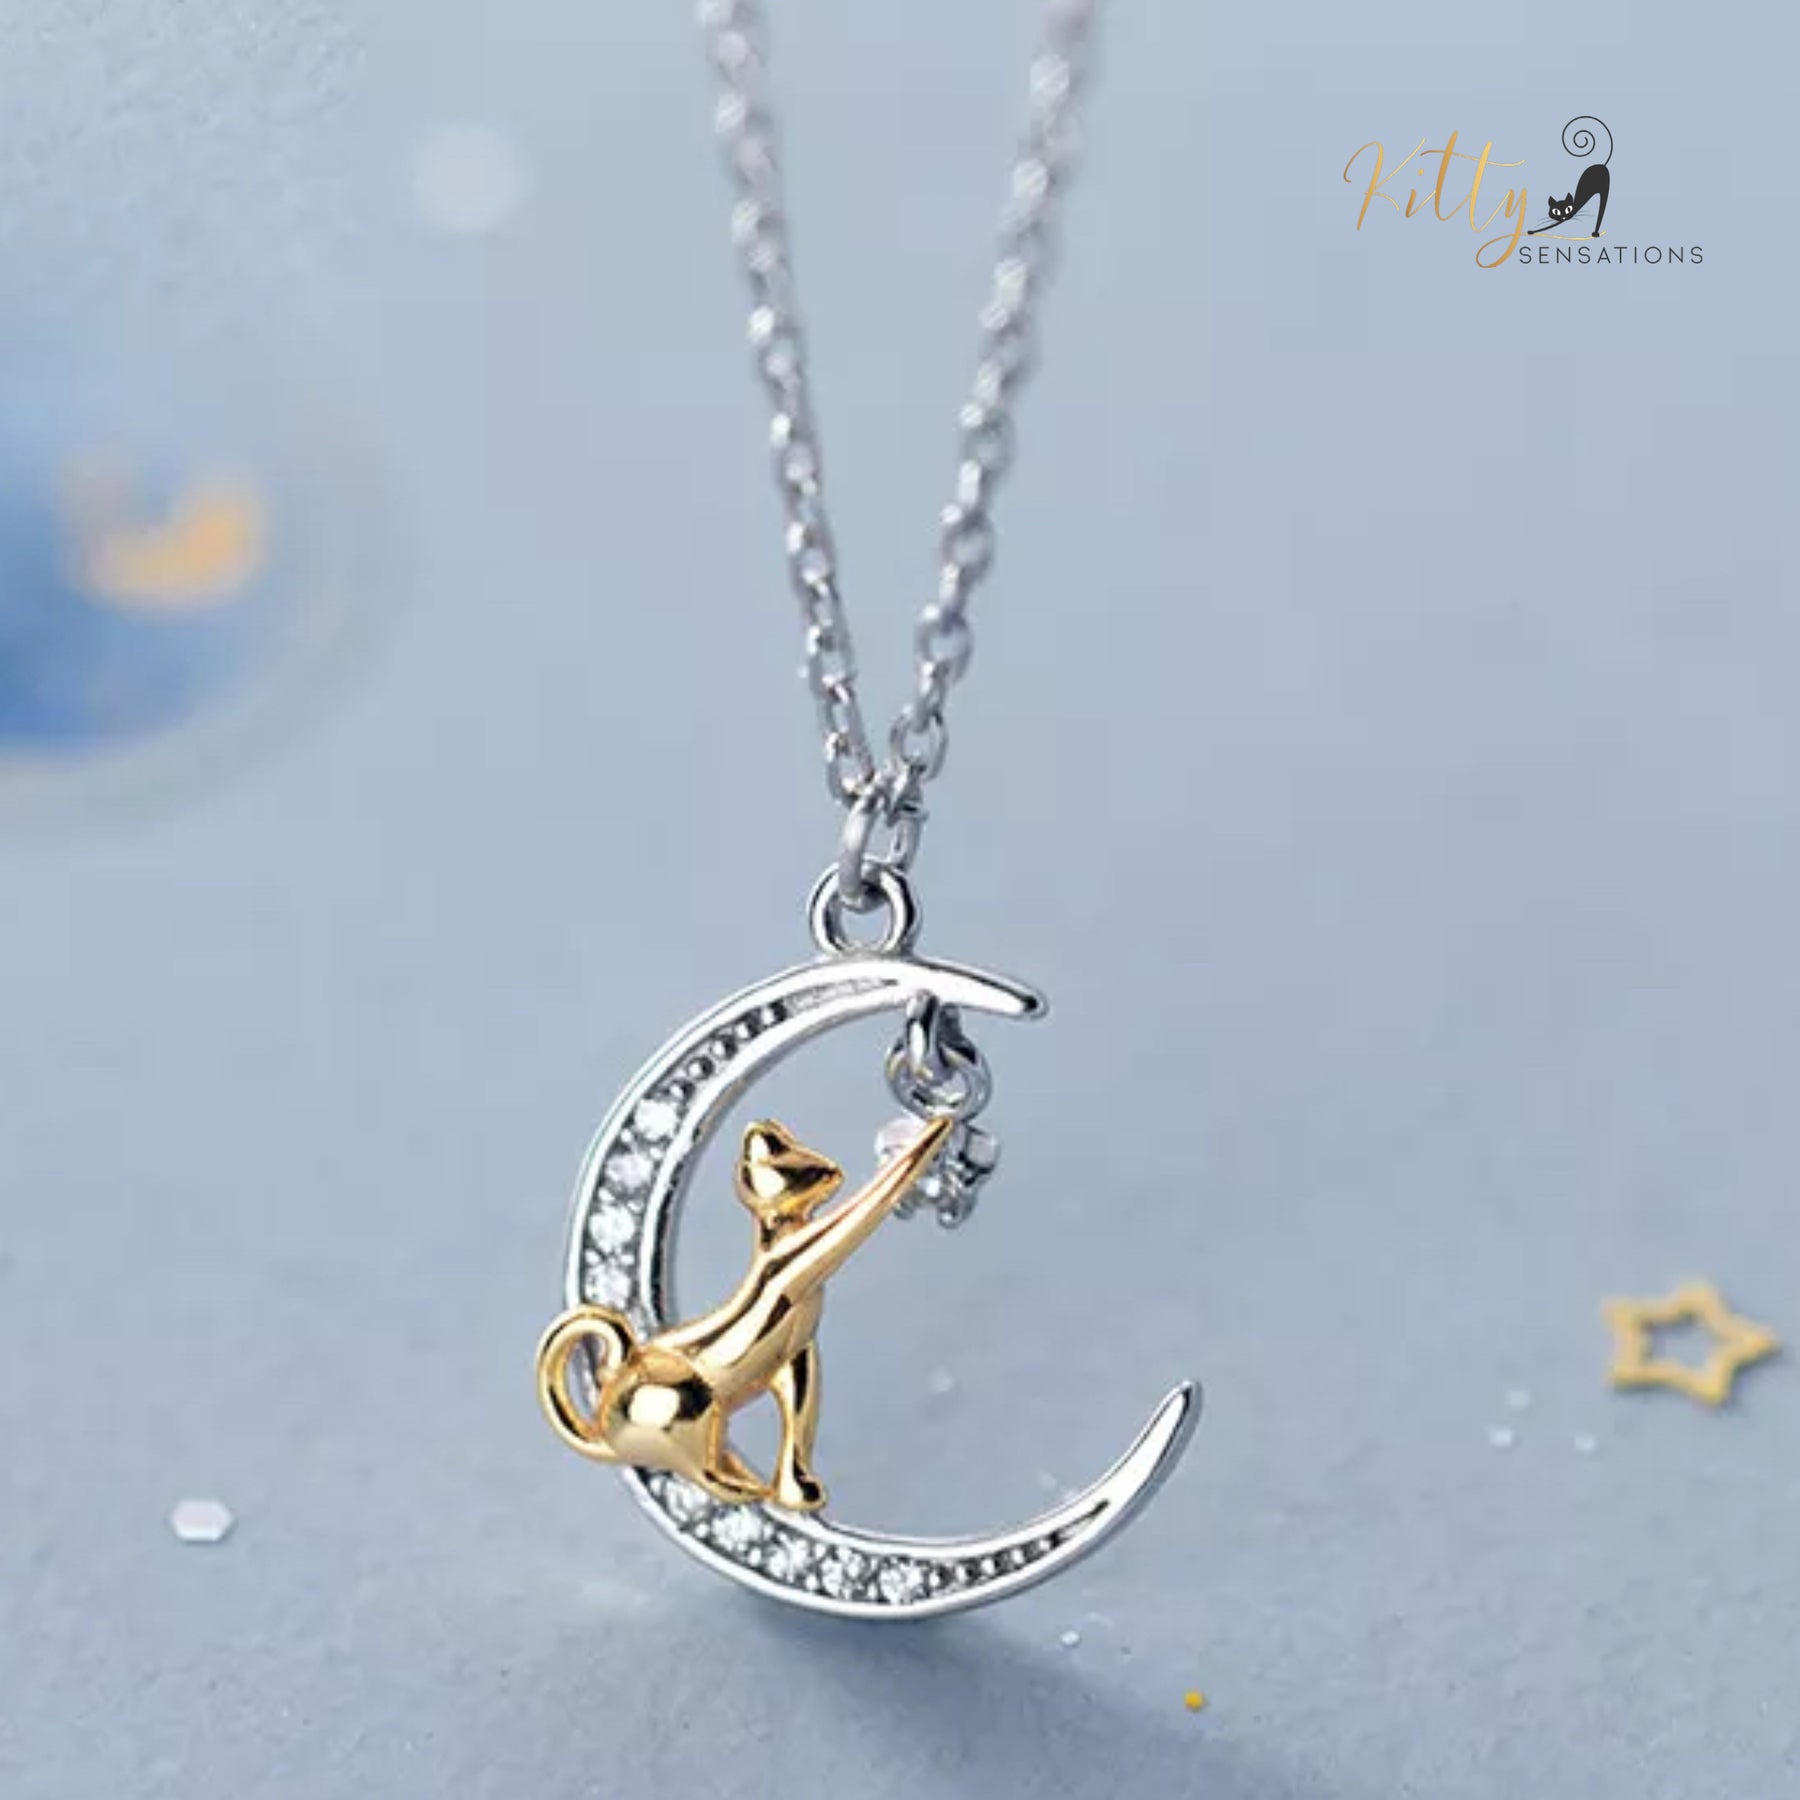 Reaching-for-The-Stars Cat Necklace in Solid 925 Sterling Silver (Gold Plated)